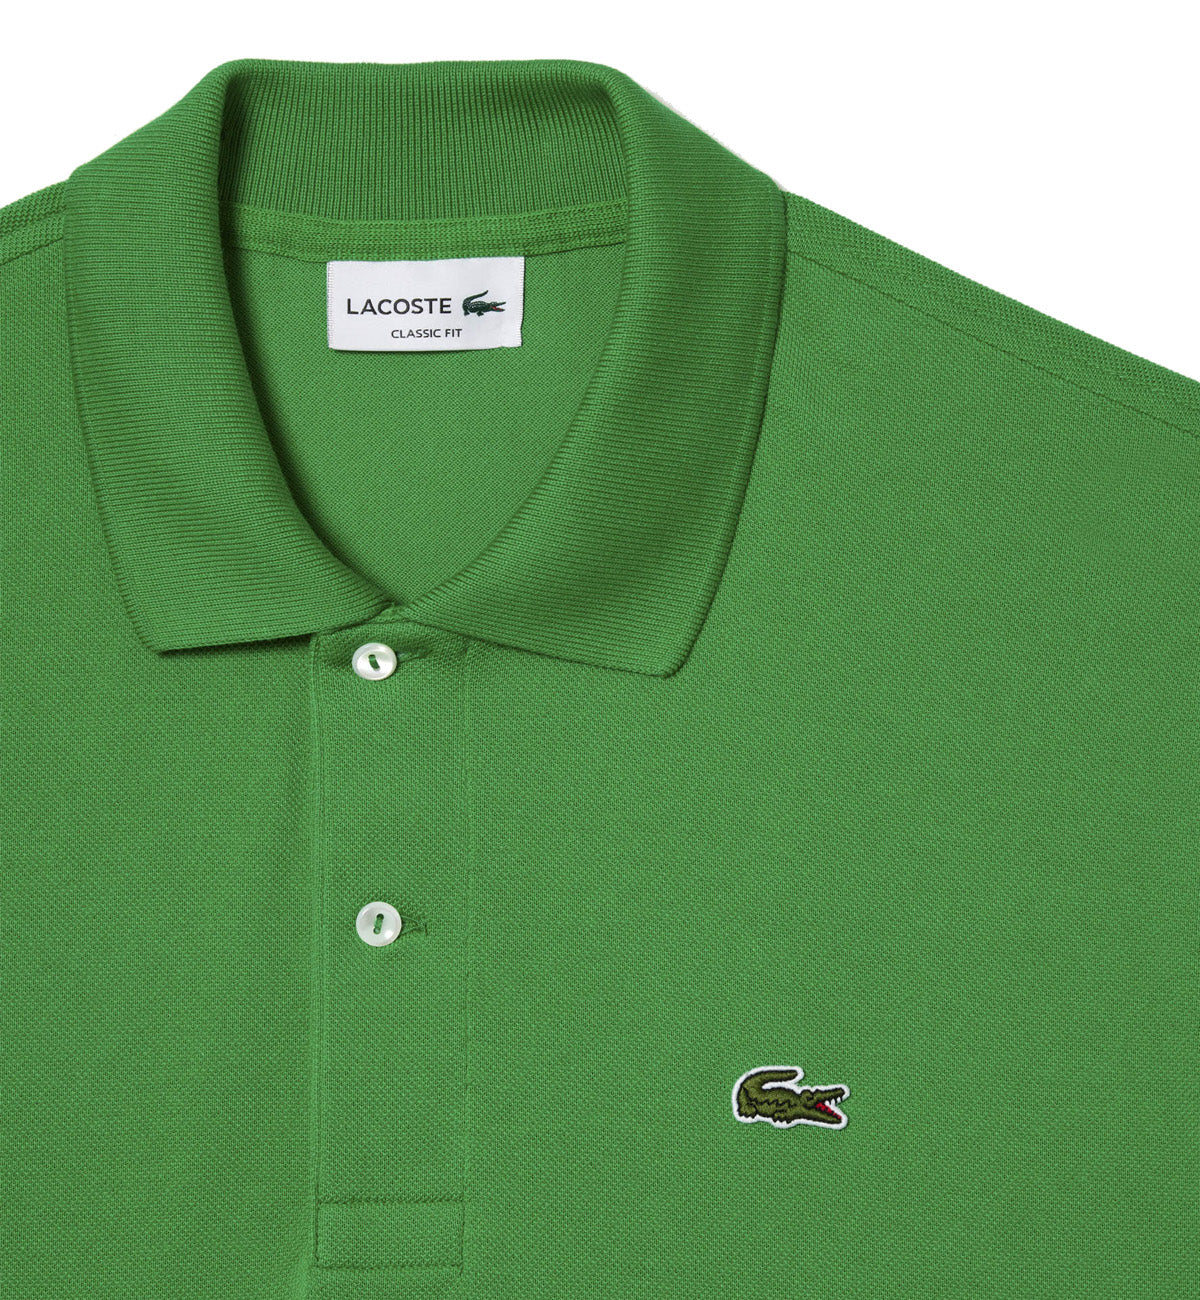 Lacoste Classic Fit Cotton Polo Shirt (Green) – The Factory KL